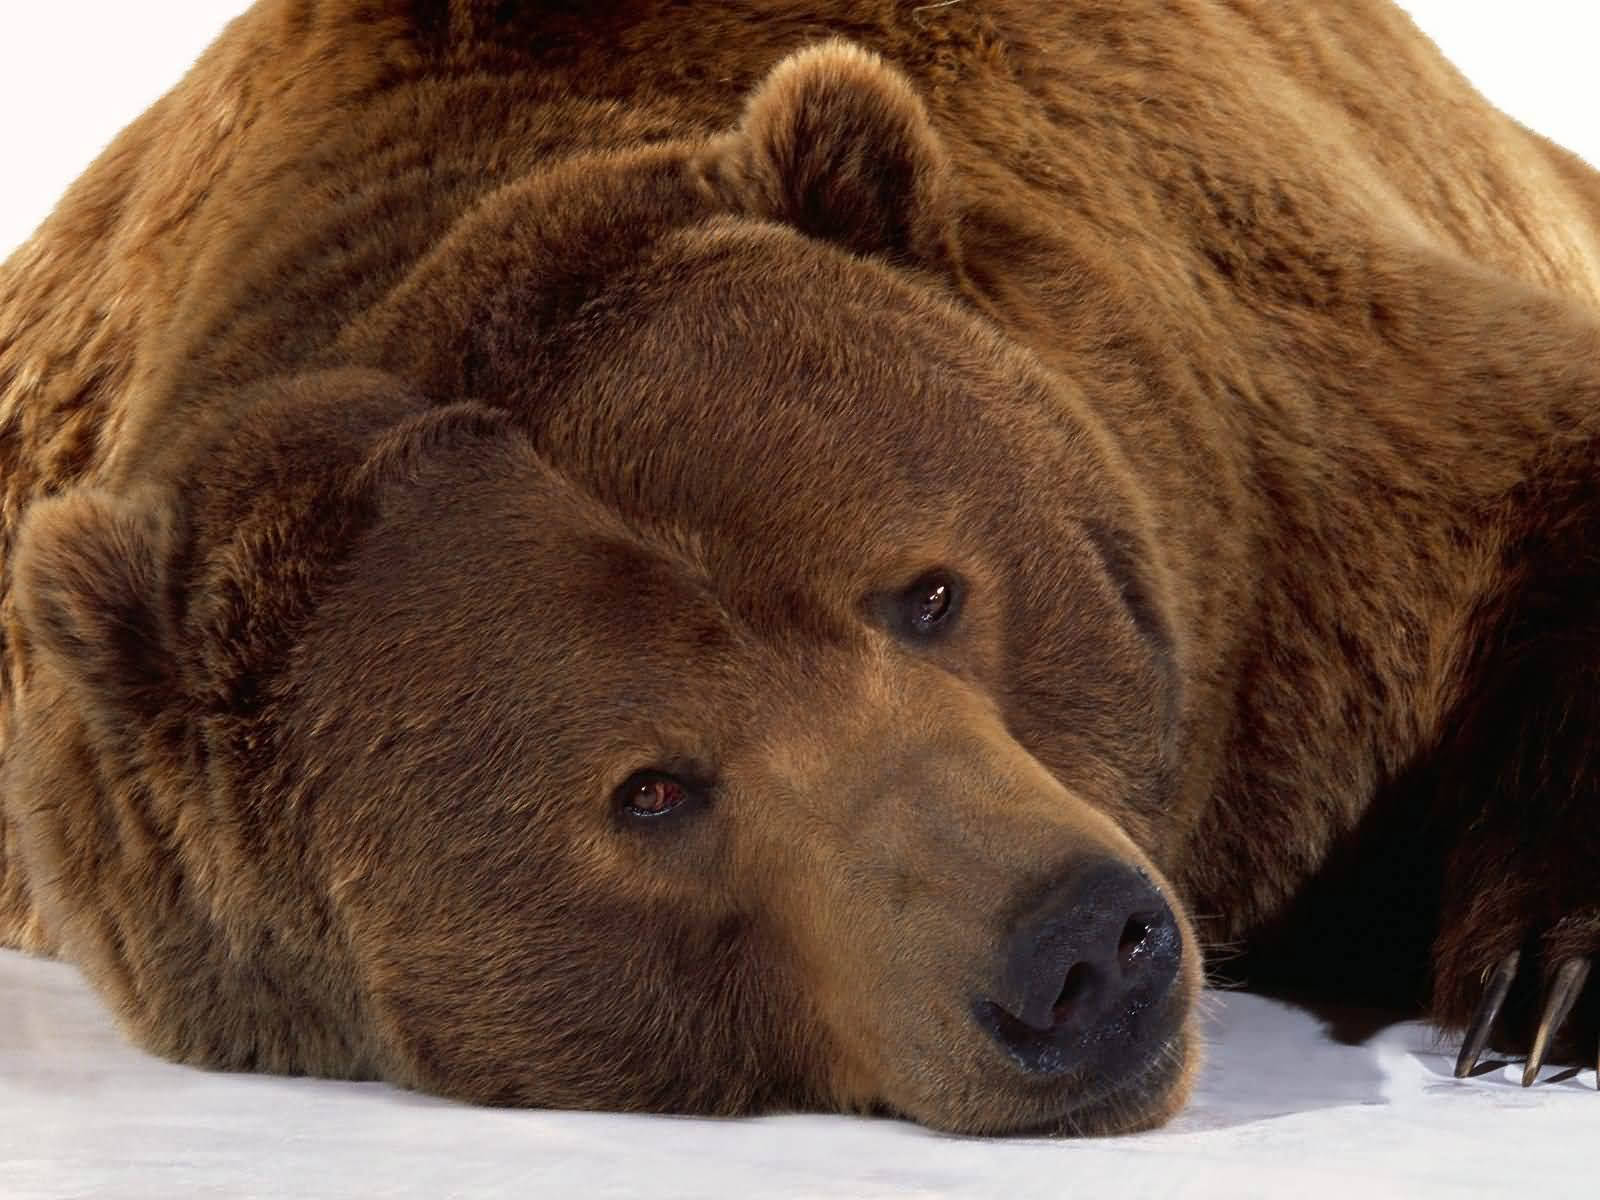 Close-up Photograph Of Grizzly Bear Wallpaper